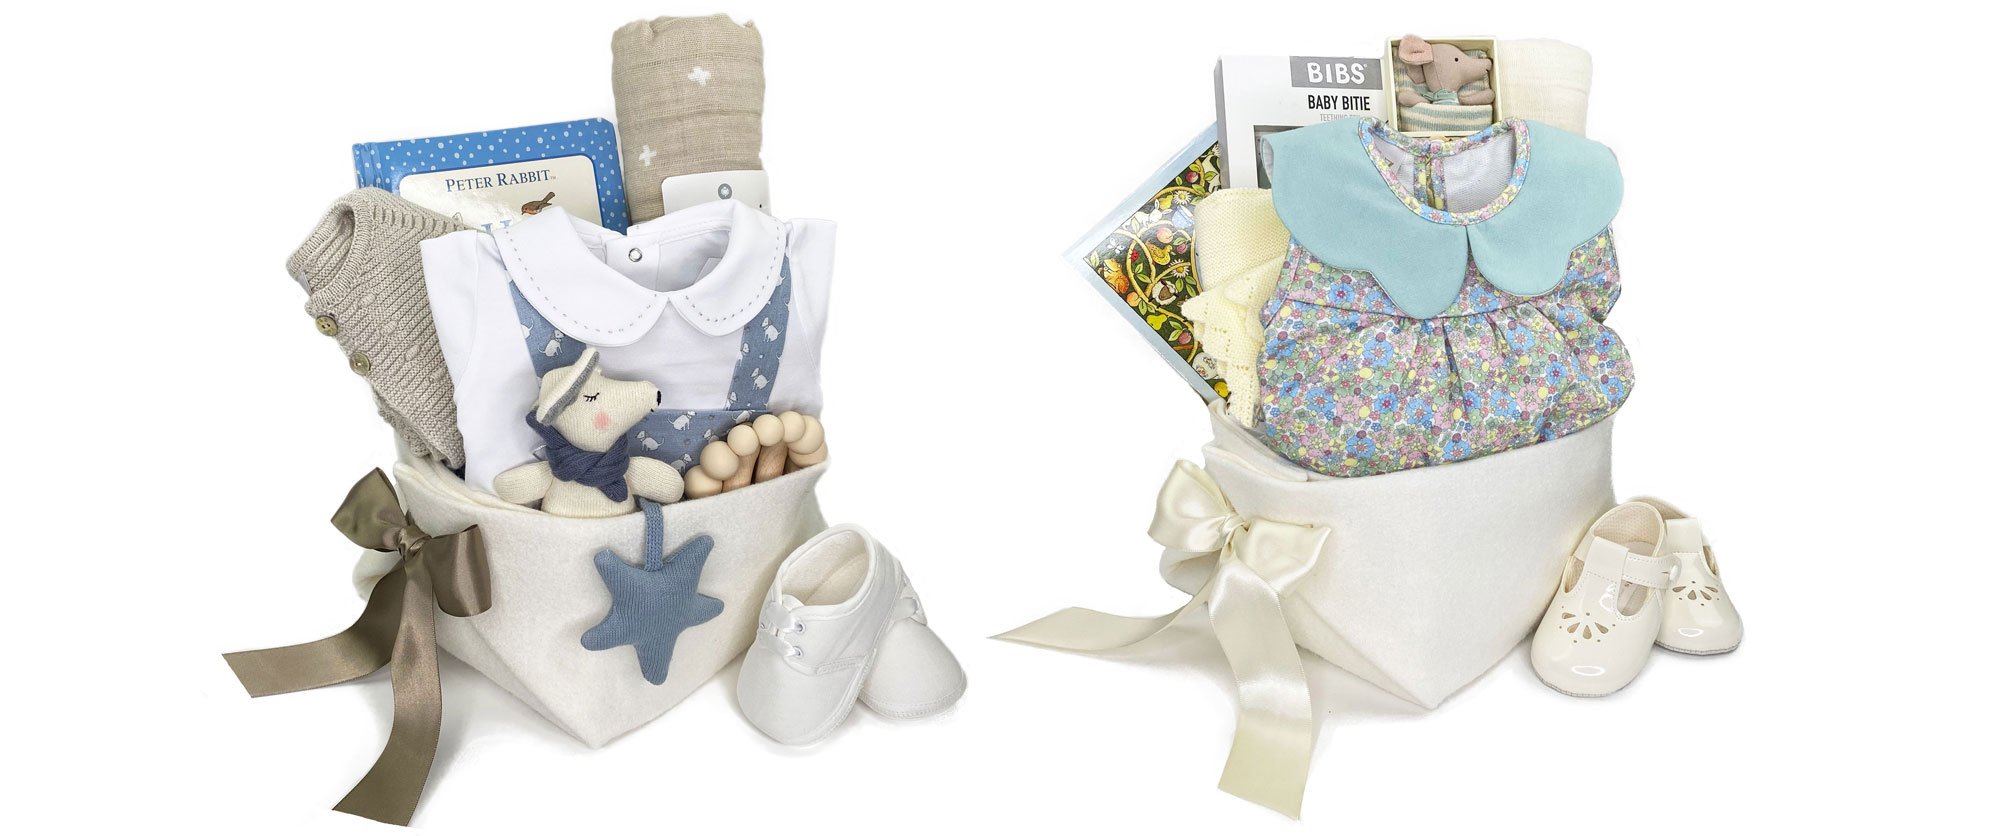 Our Cool Baby Boy Gift Baskets Are Perfect For Newborns - MY BASKETS